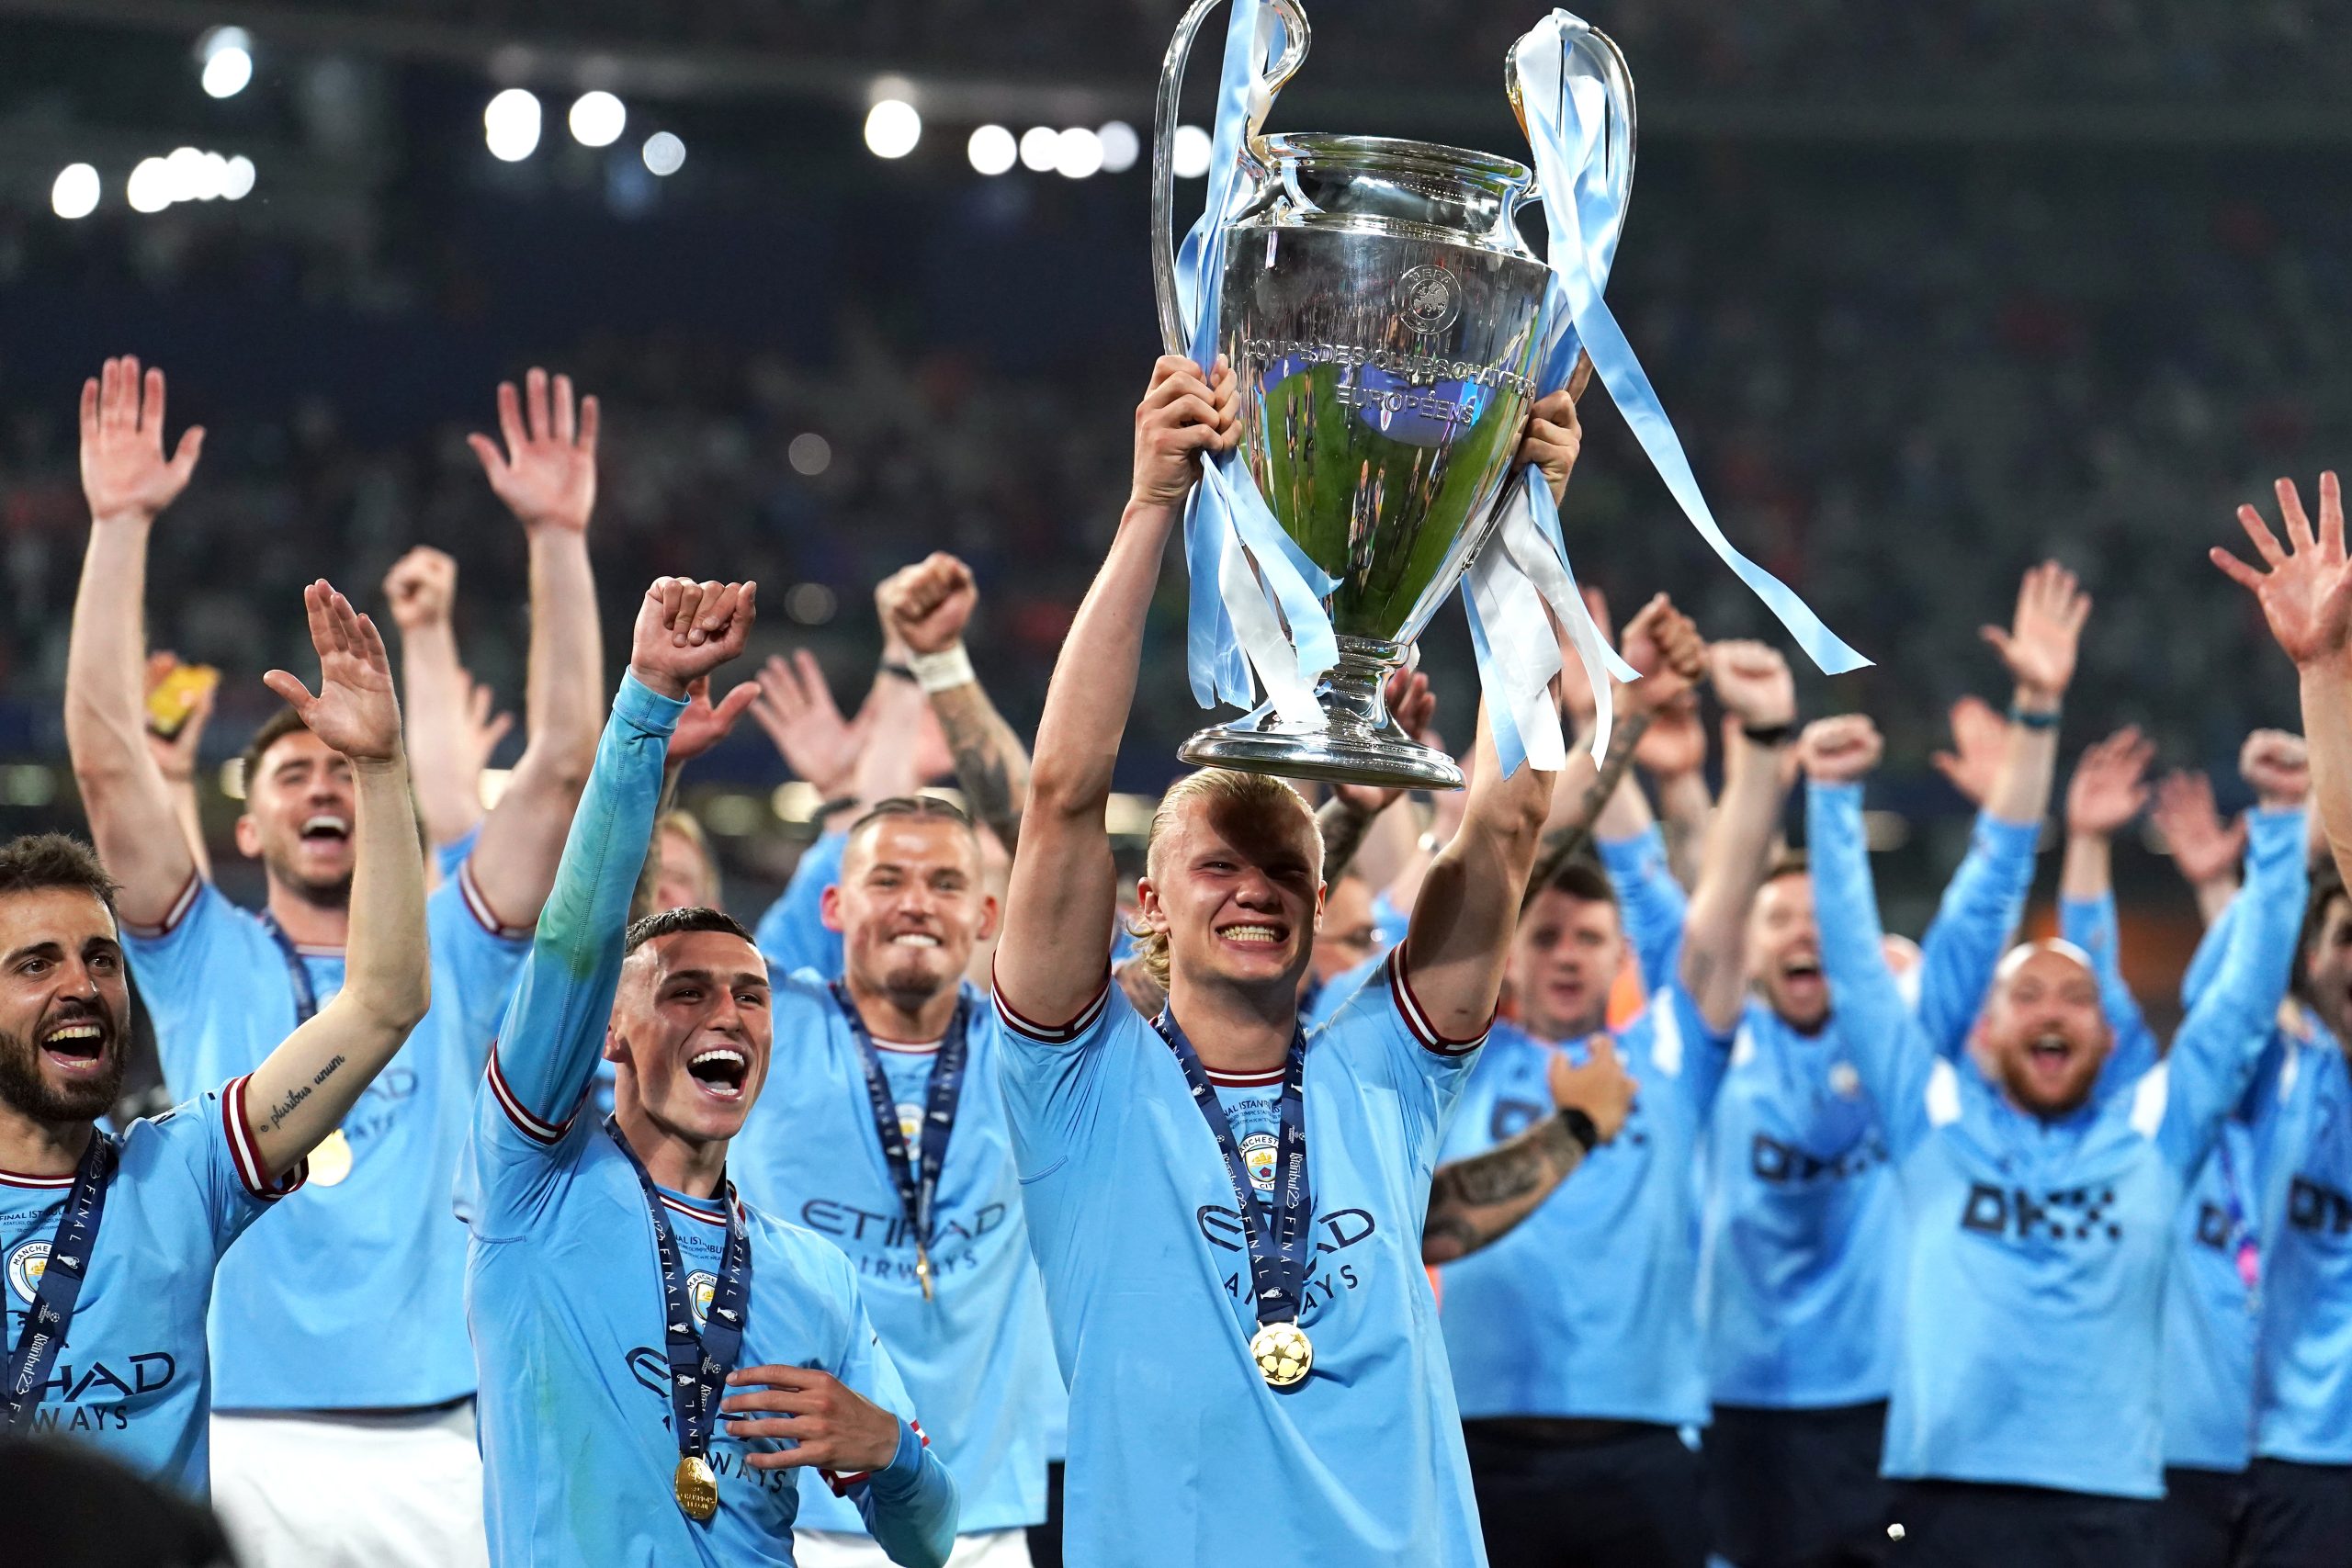 Pep’s future and Premier League charges – Where next for Man City after treble?